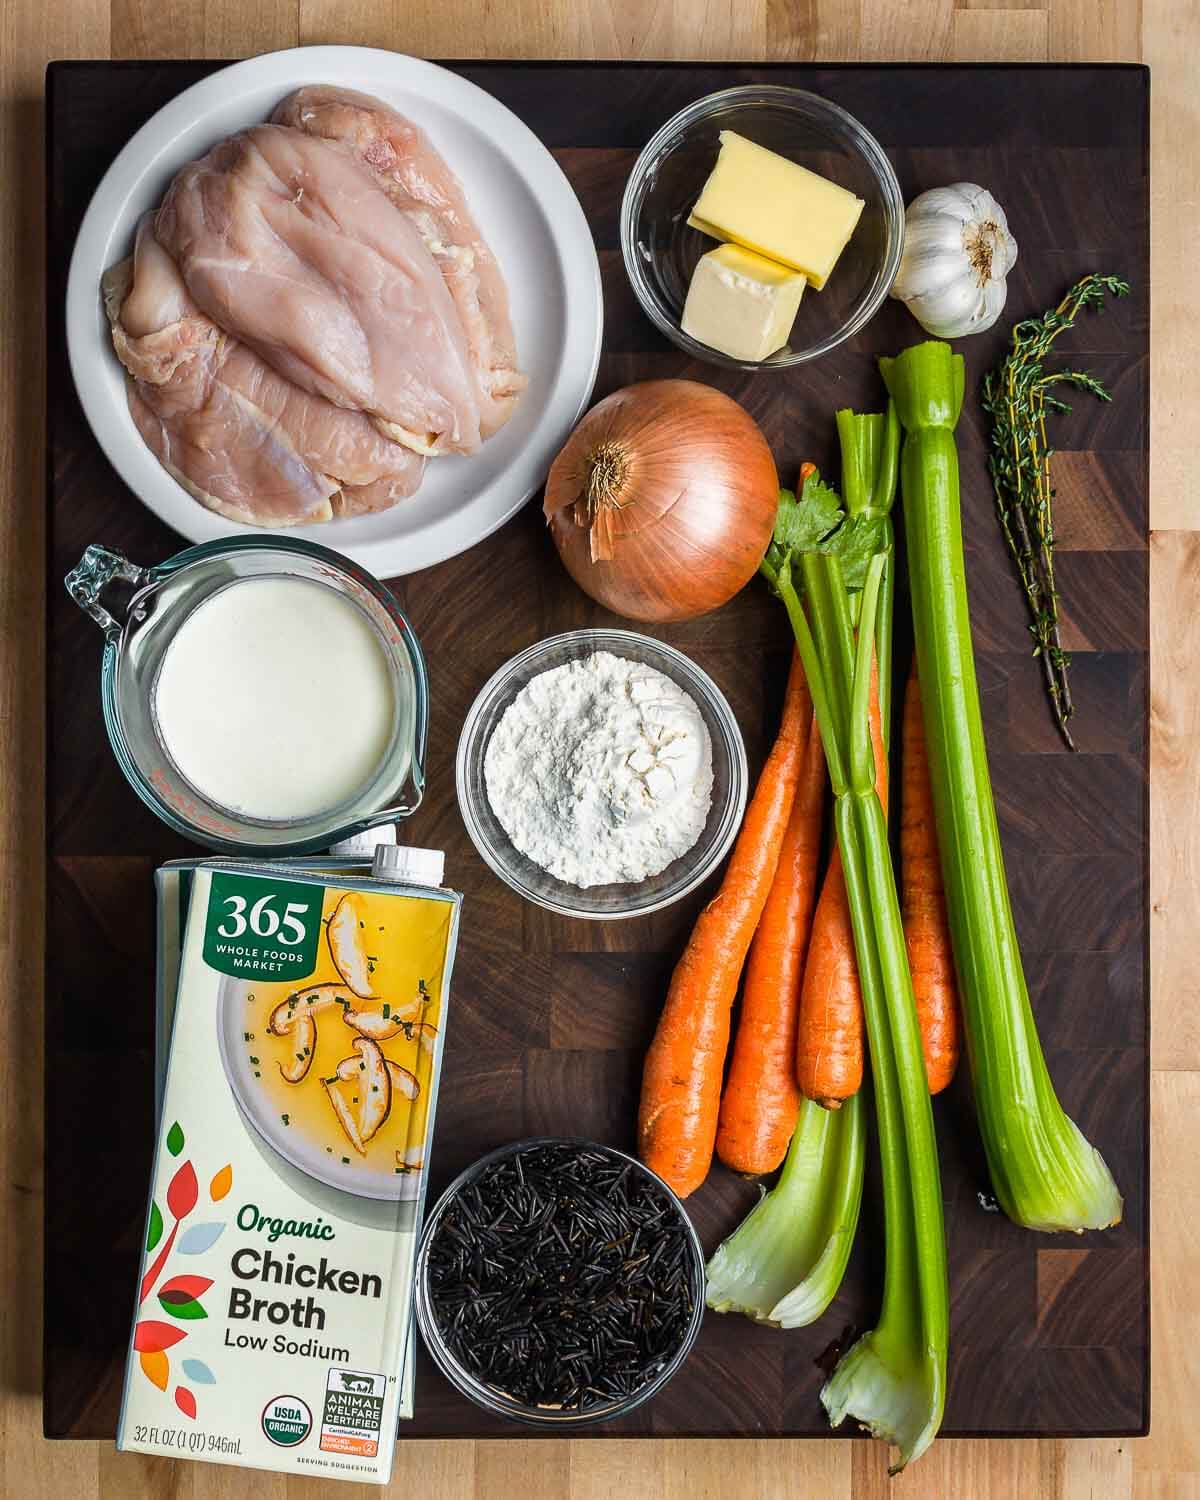 Ingredients shown: chicken, butter, garlic, onion, celery, carrots, thyme, heavy cream, low-sodium chicken stock, flour, and wild rice.